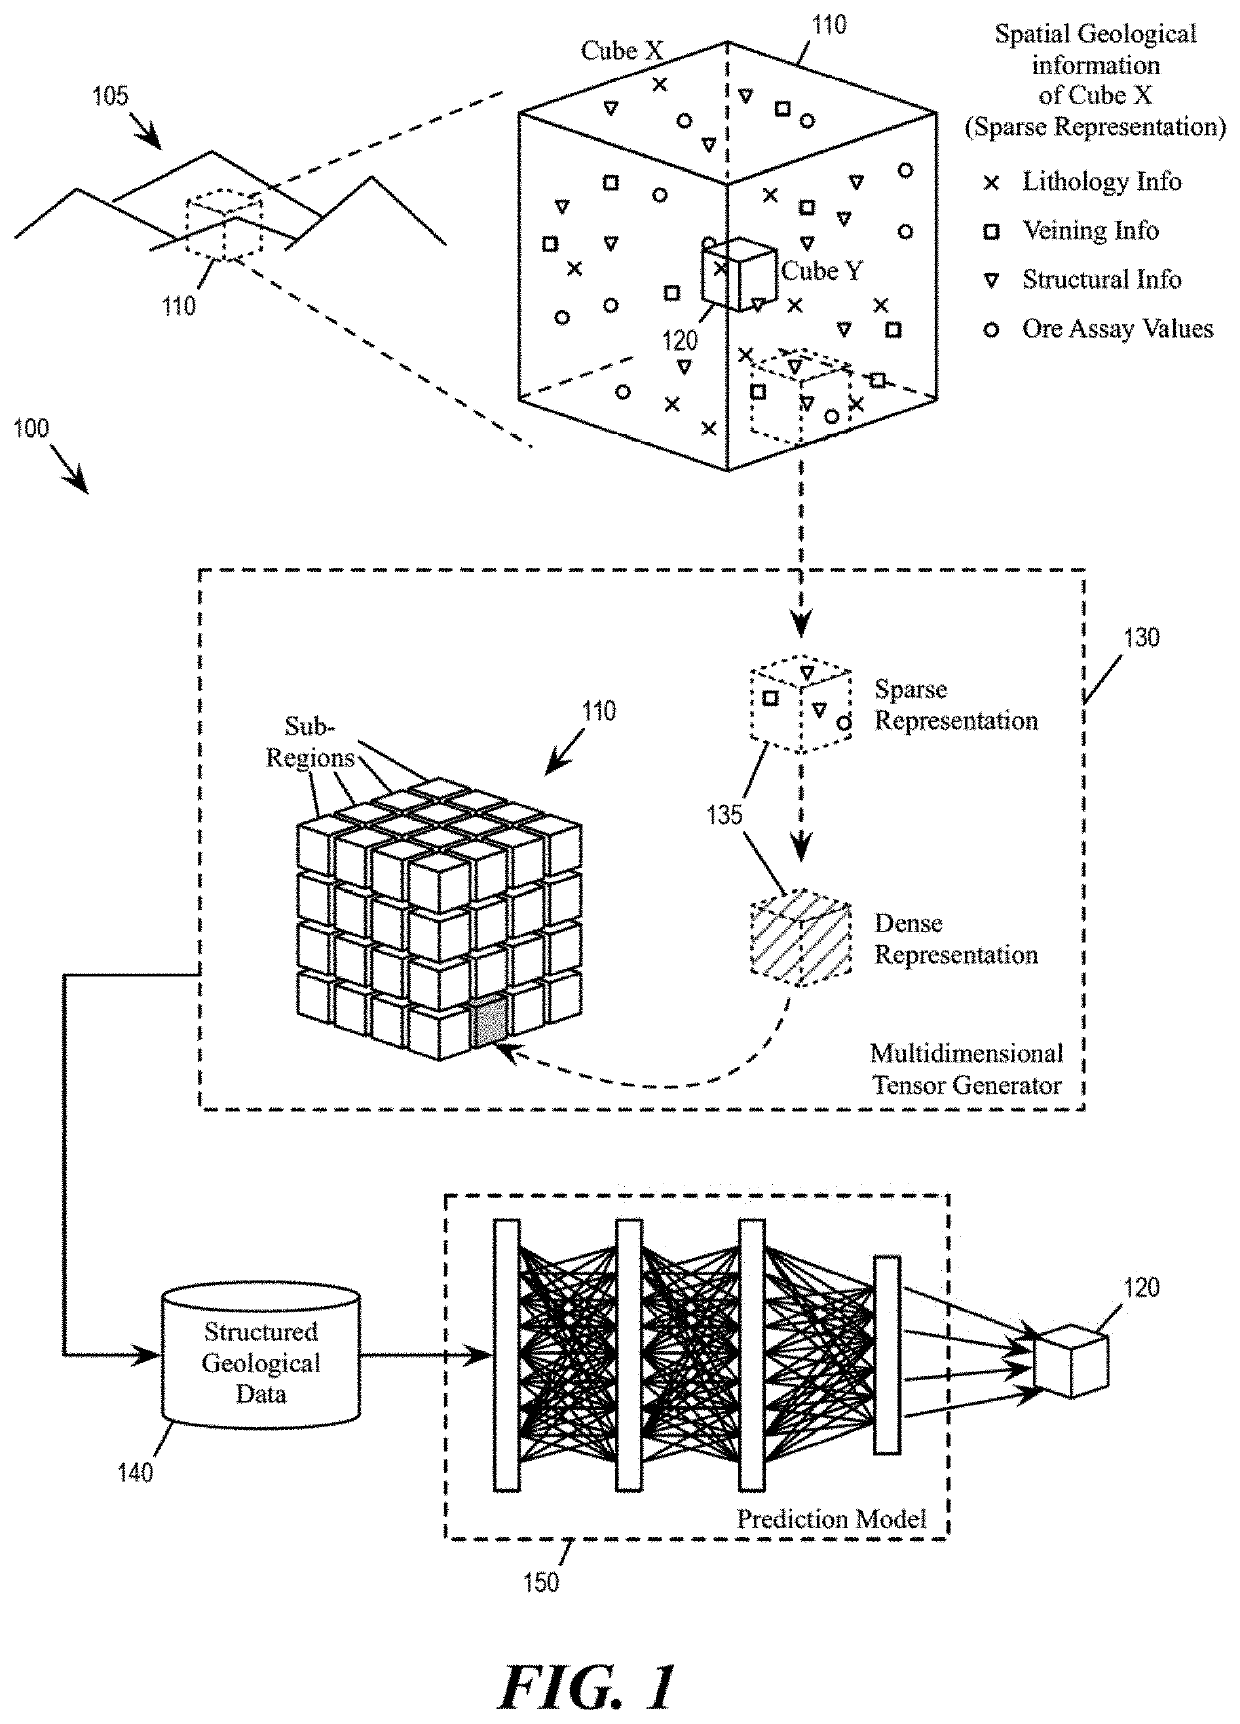 Estimate ore content based on spatial geological data through 3D convolutional neural networks